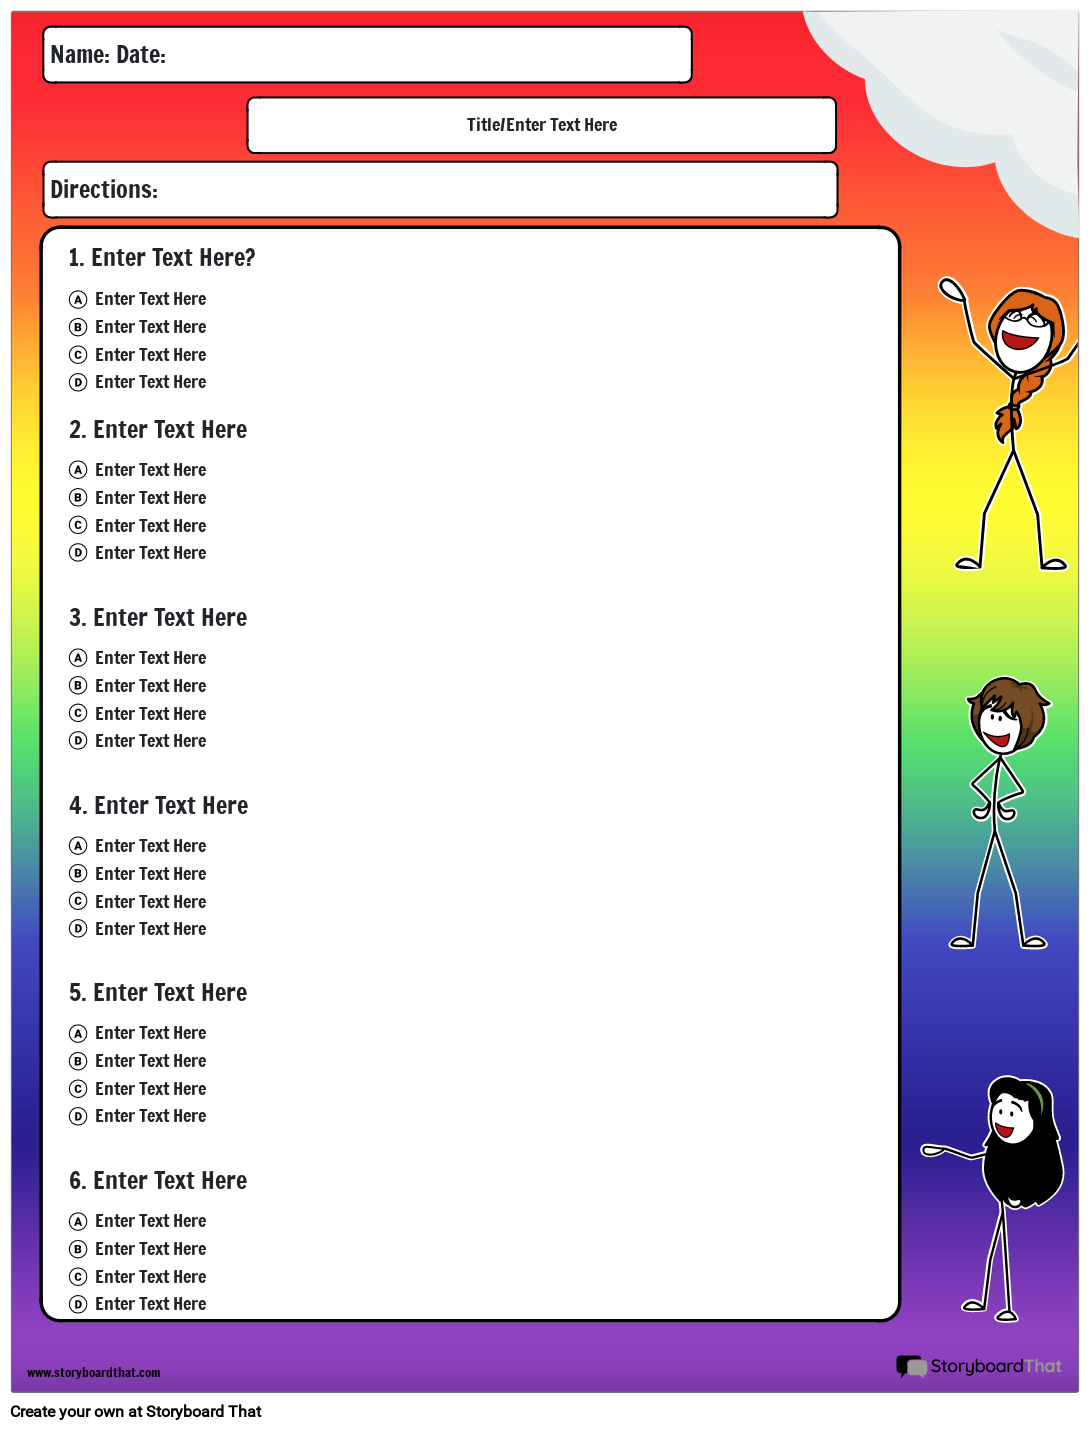 multiple-choice-test-template-multiple-choice-test-maker-storyboardthat